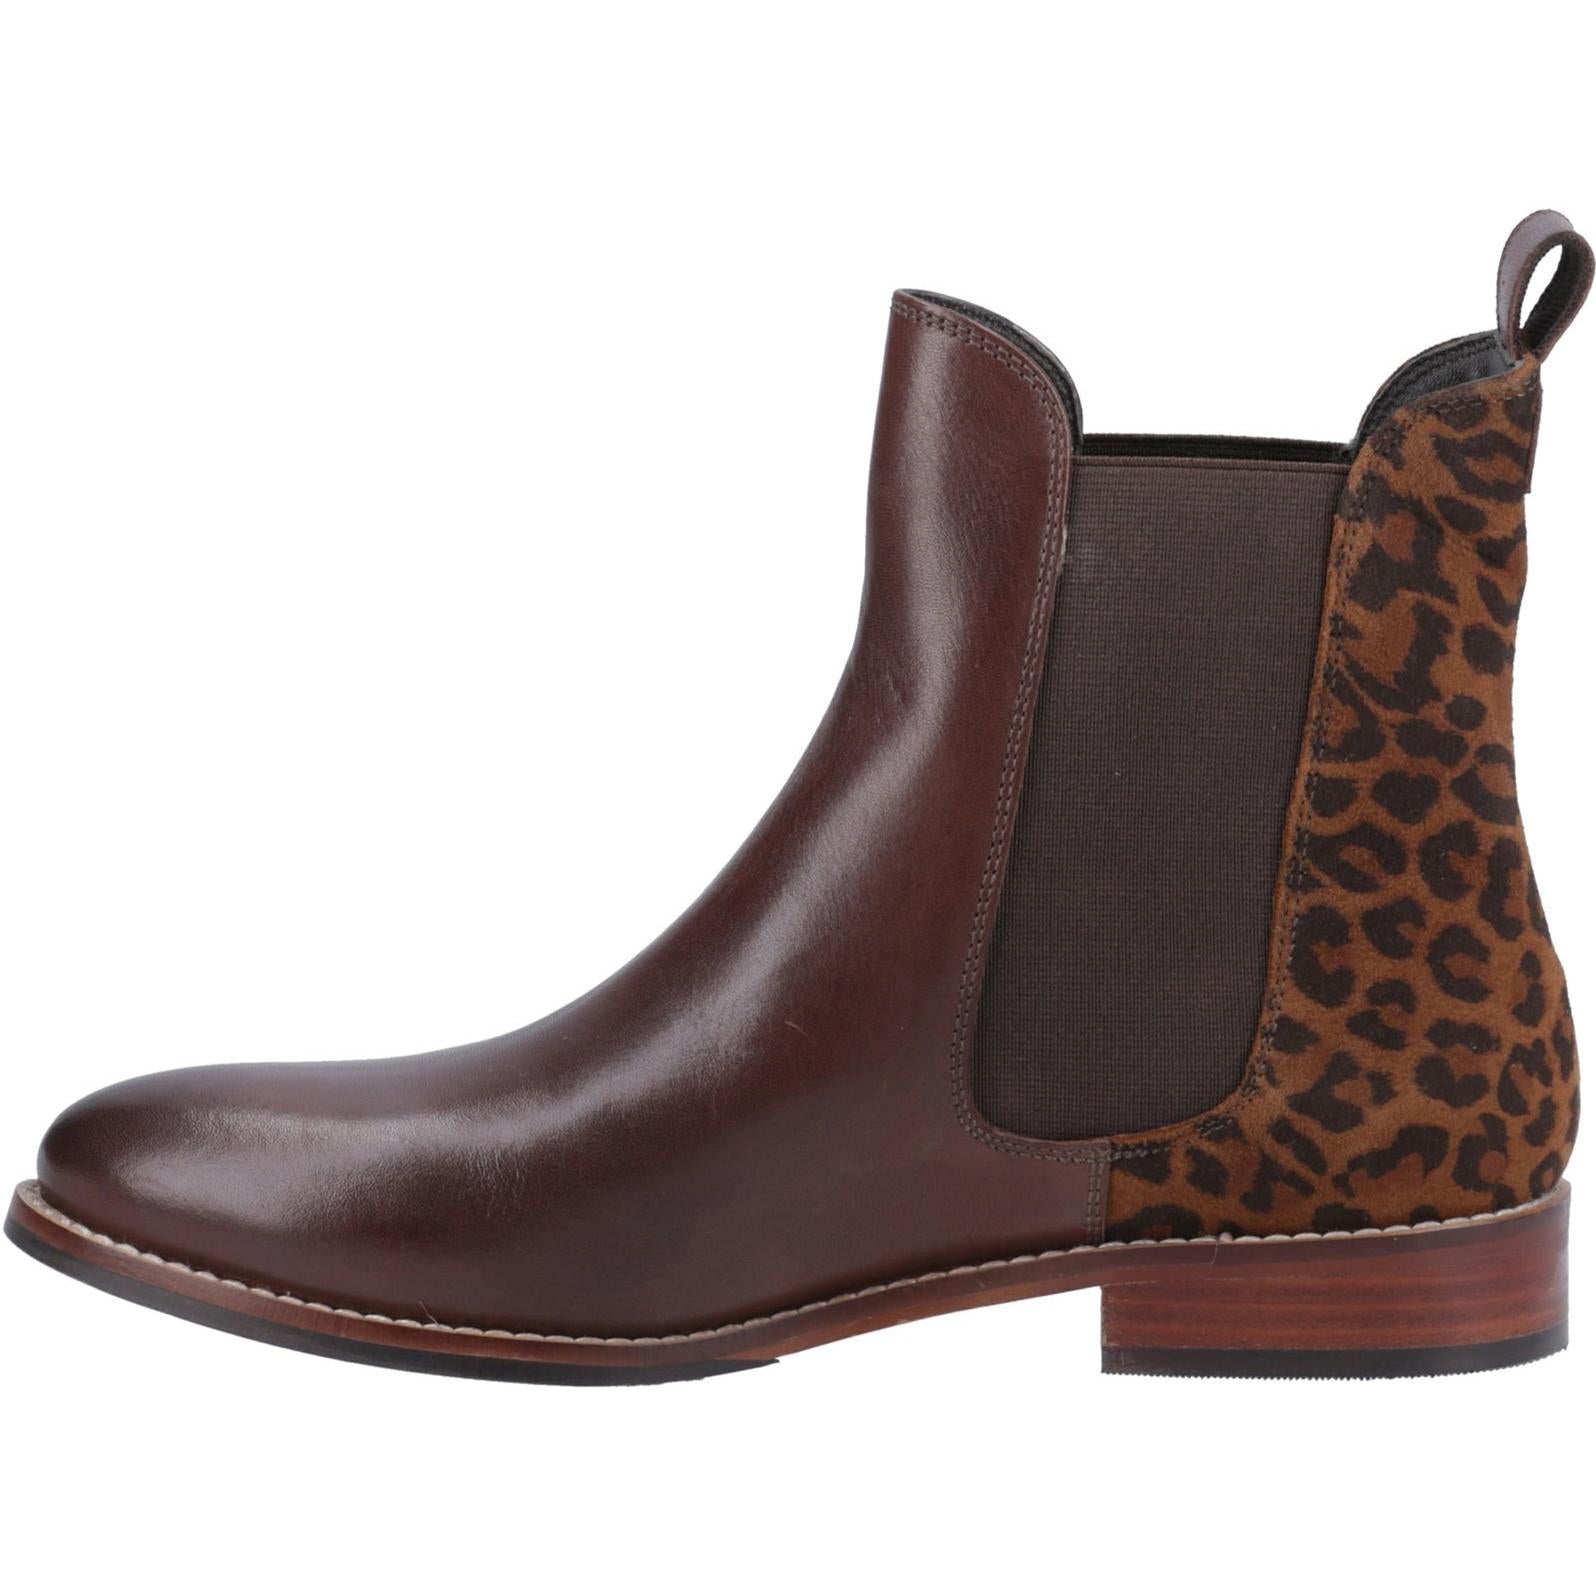 Hush Puppies Colette Boot